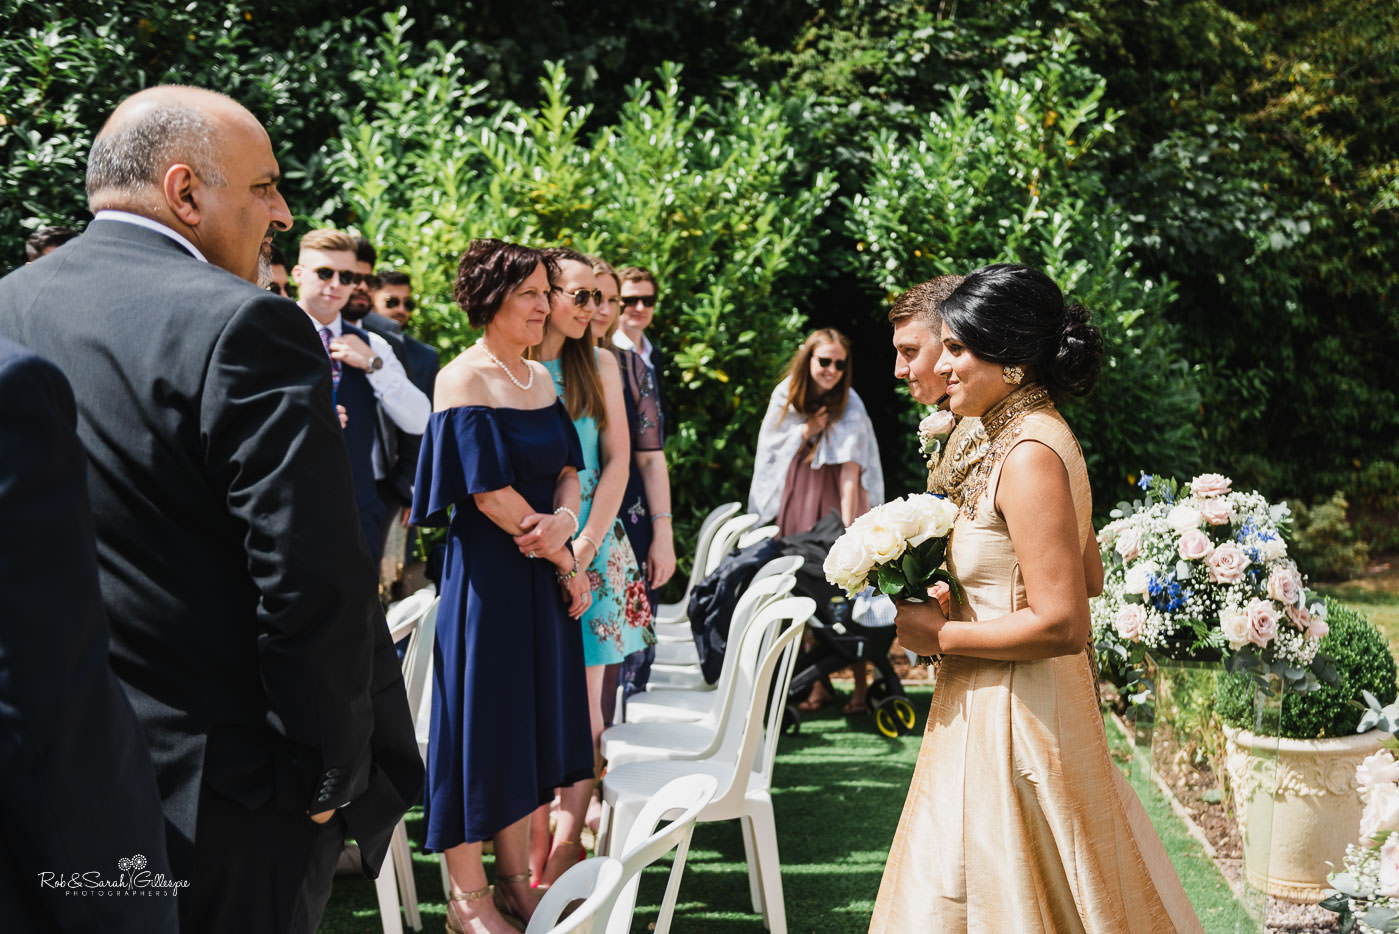 Outdoor fusion wedding ceremony at Pendrell Hall